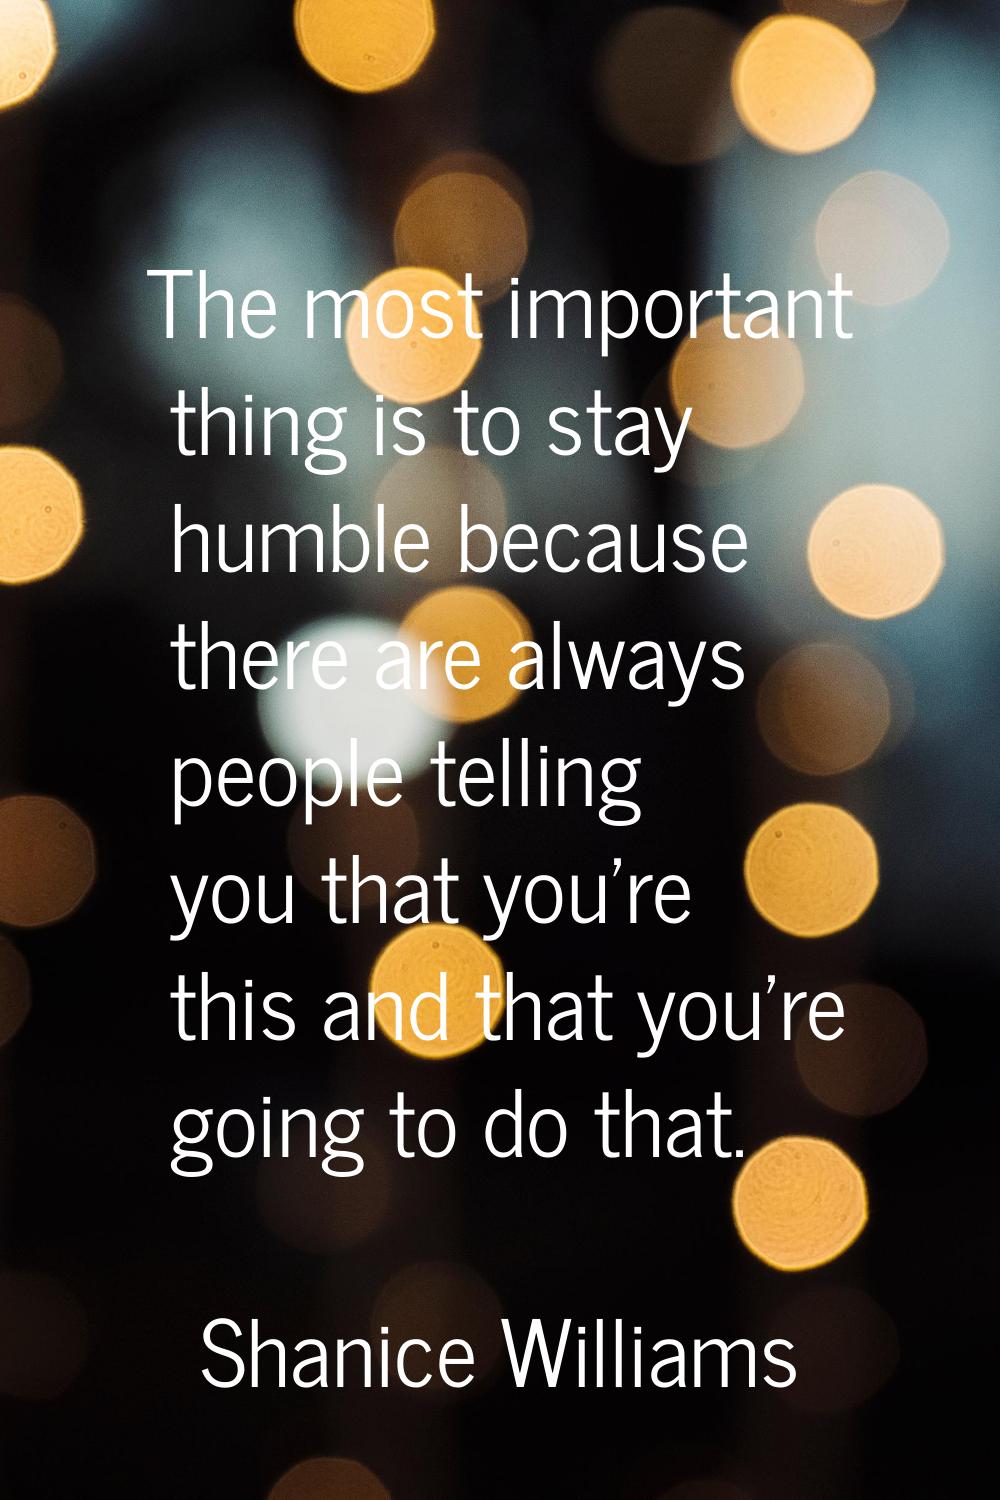 The most important thing is to stay humble because there are always people telling you that you're 